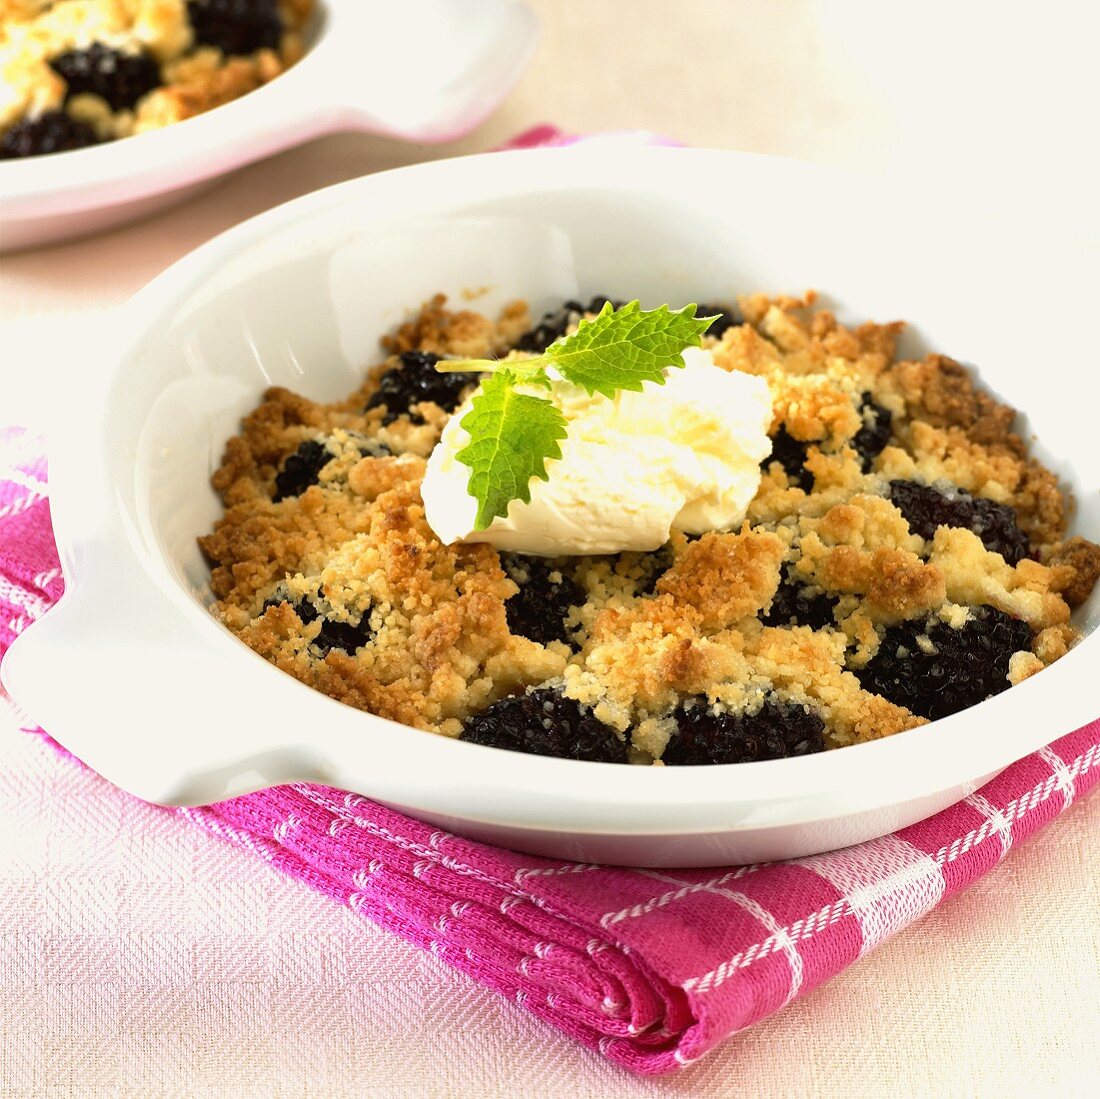 Blueberry crumble with whipped cream